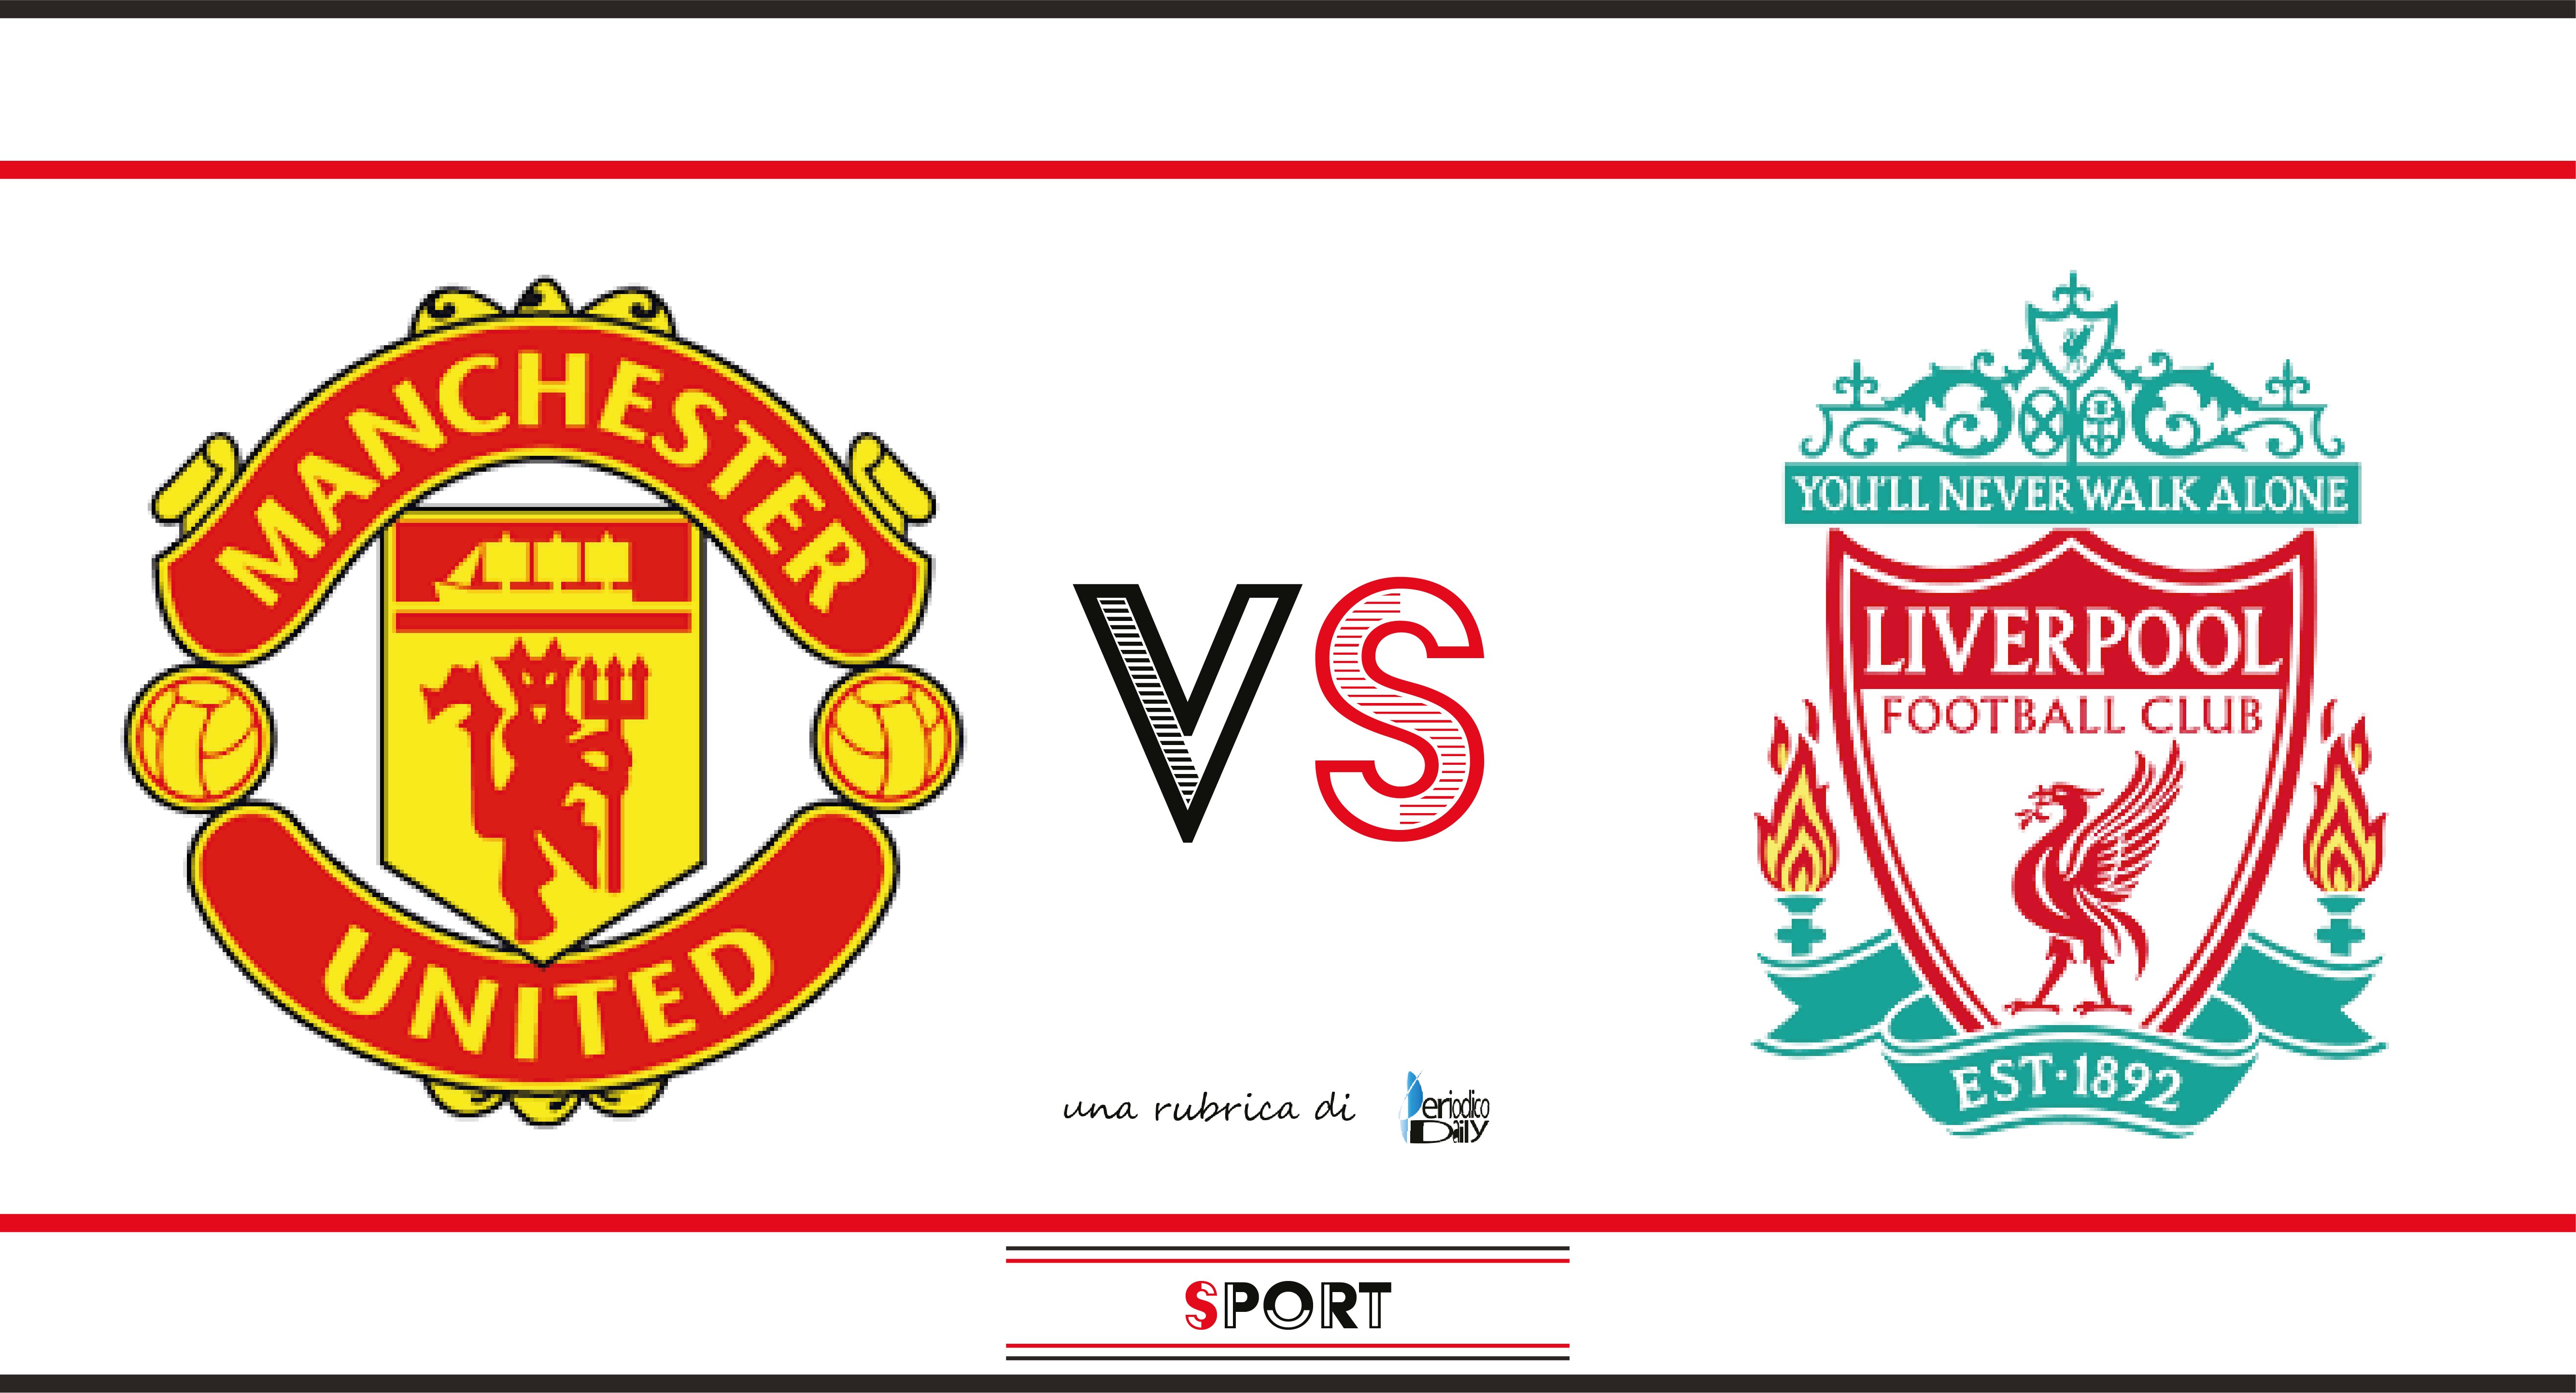 Https Sport Periodicodaily Com Wp Content Uploads 2021 04 Manchester United Liverpool Png [ 2885 x 5334 Pixel ]